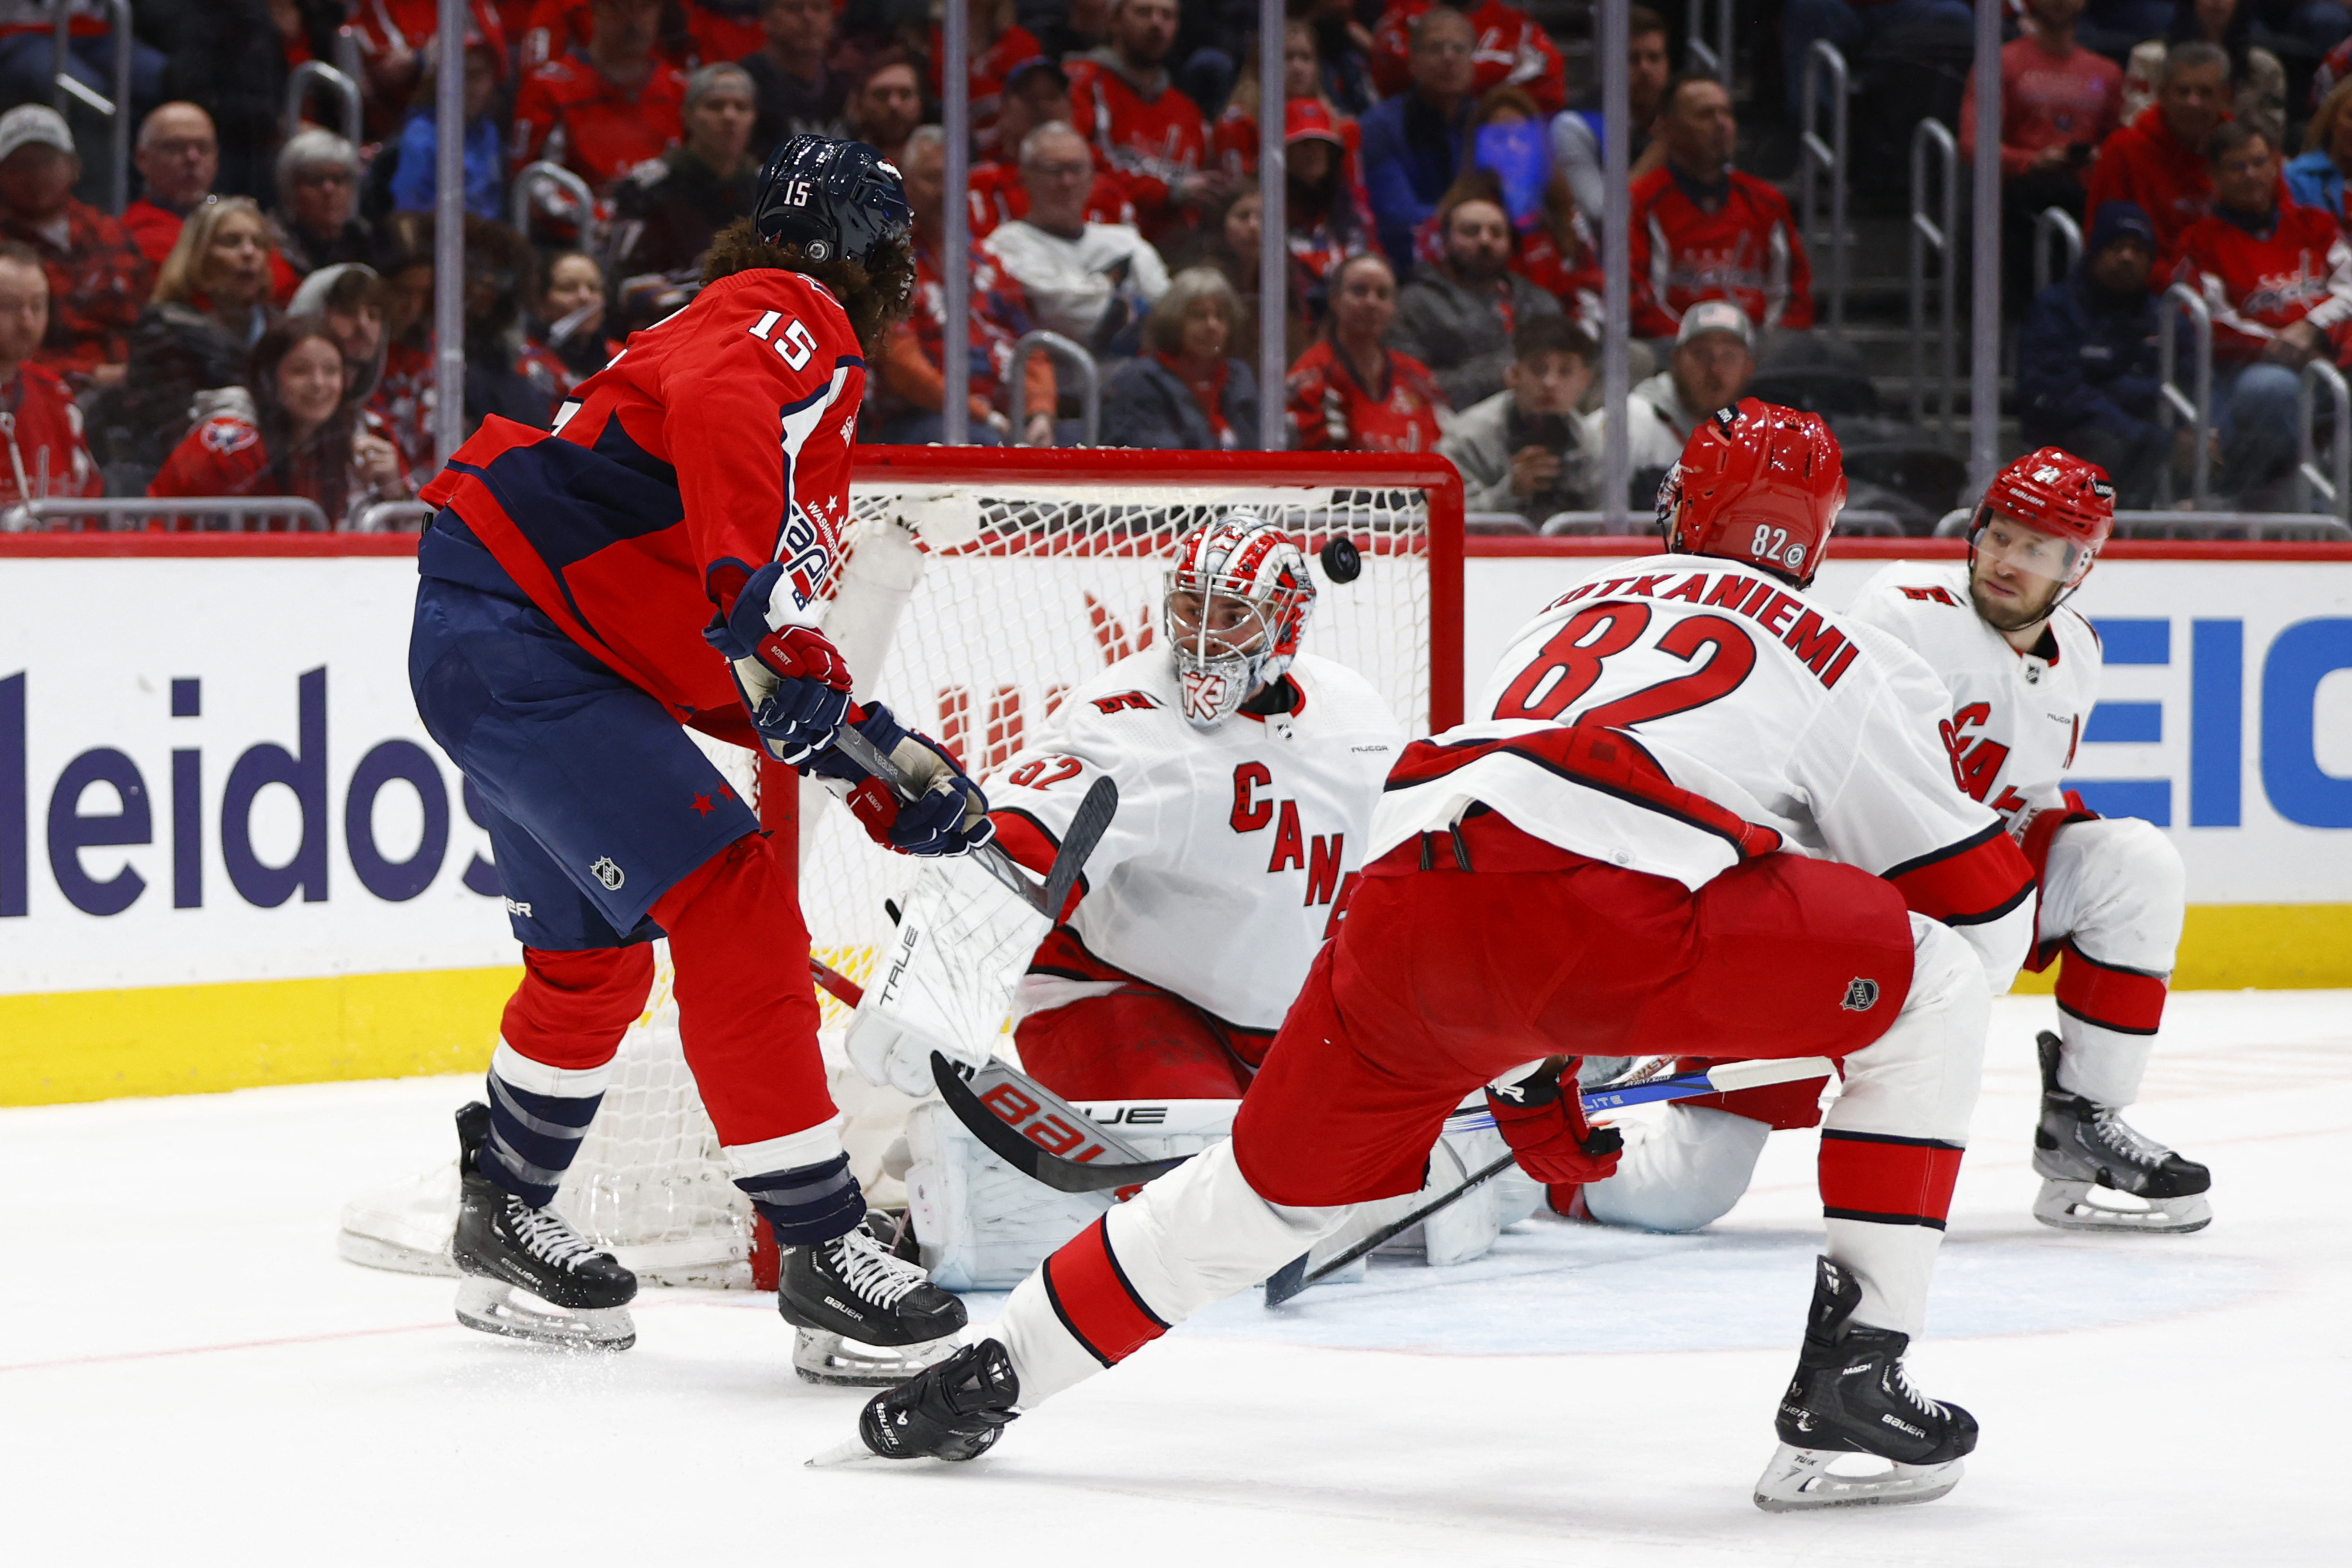 Hurricanes tie it late, but Caps win 7-6 in shootout